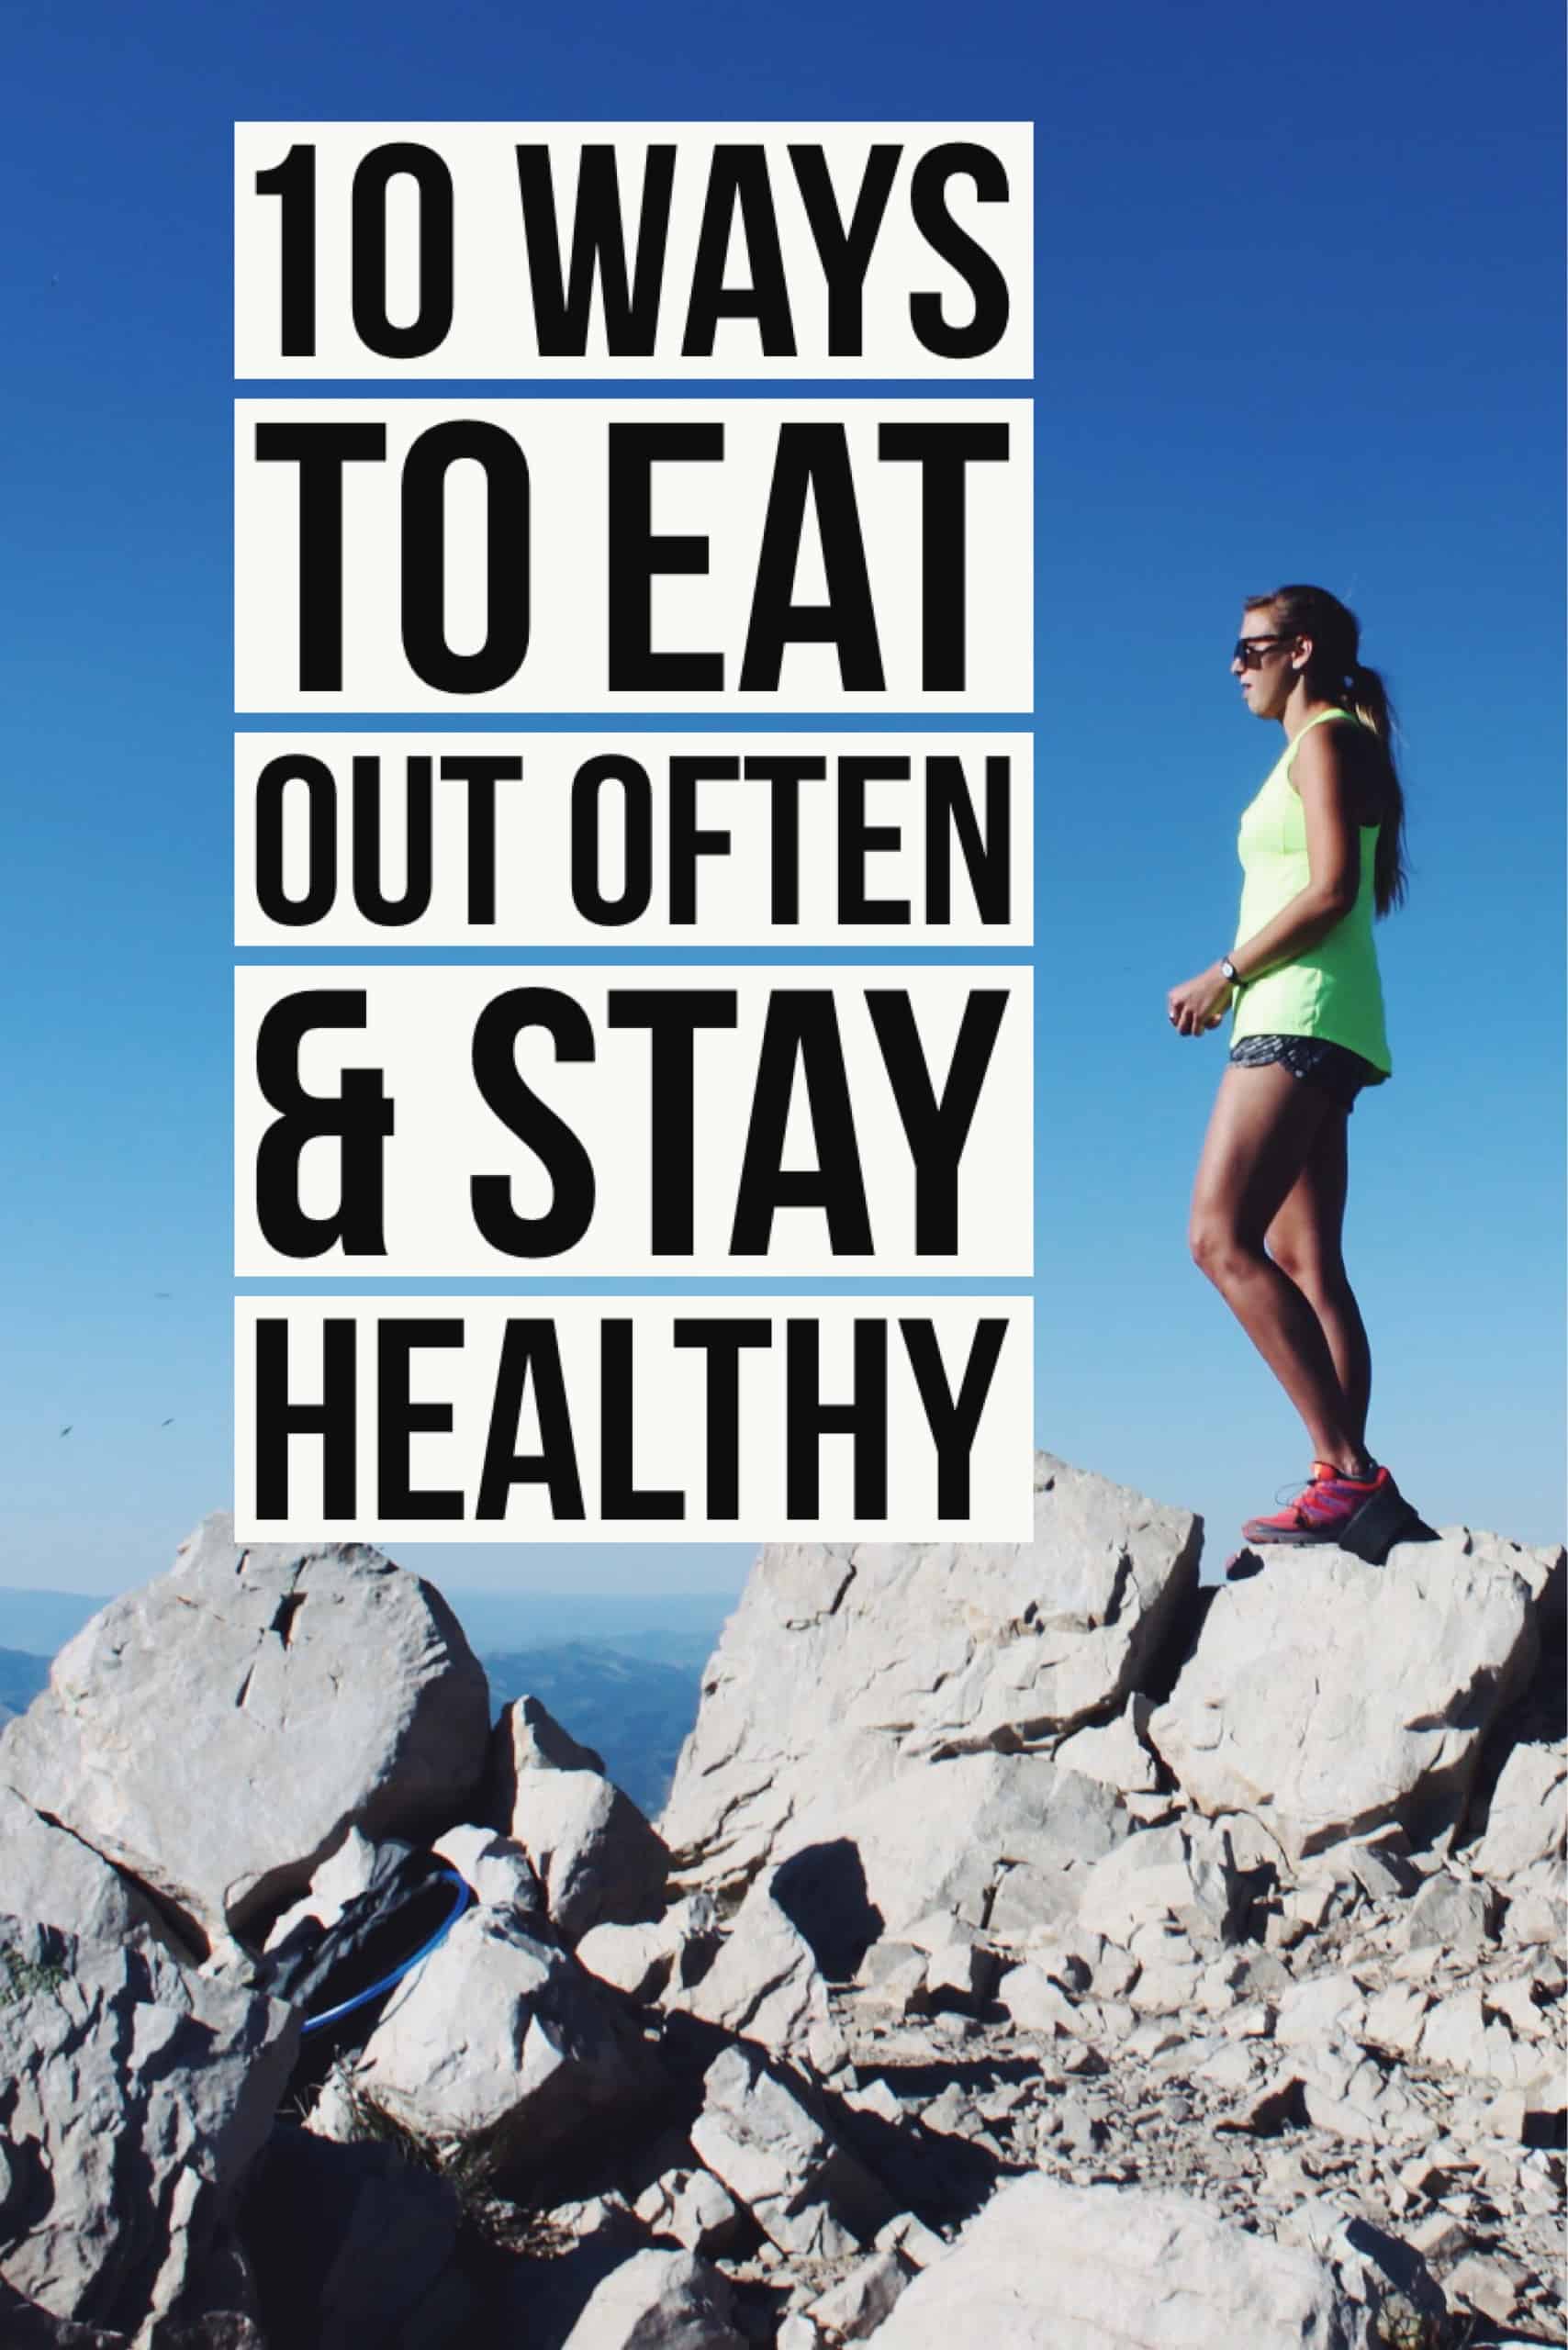 10 Ways To Eat Out Often & STAY HEALTHY